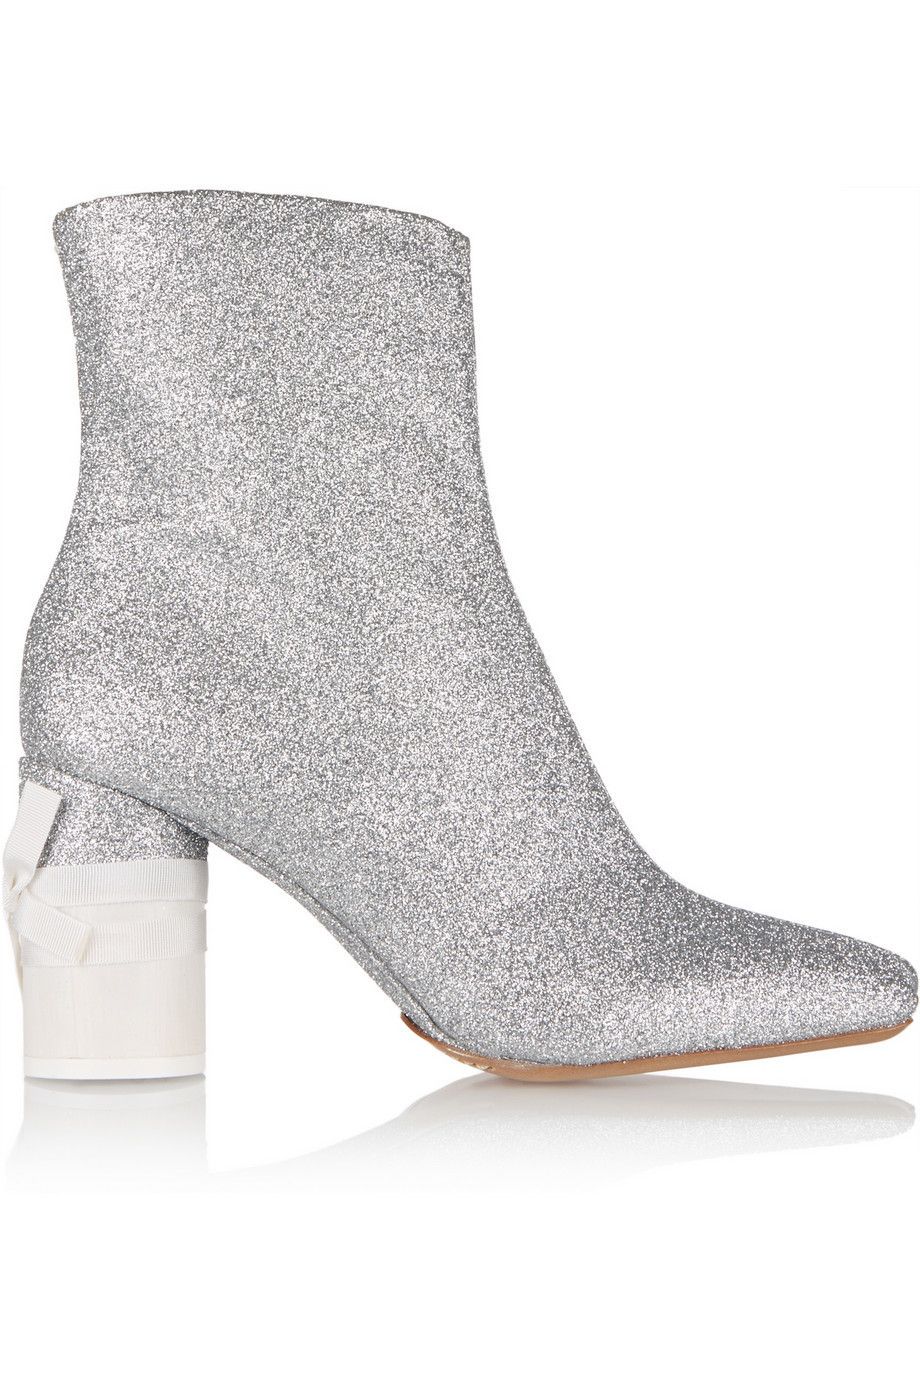 Shoe, White, Boot, Fashion, Black, Grey, Beige, Teal, Leather, Silver, 